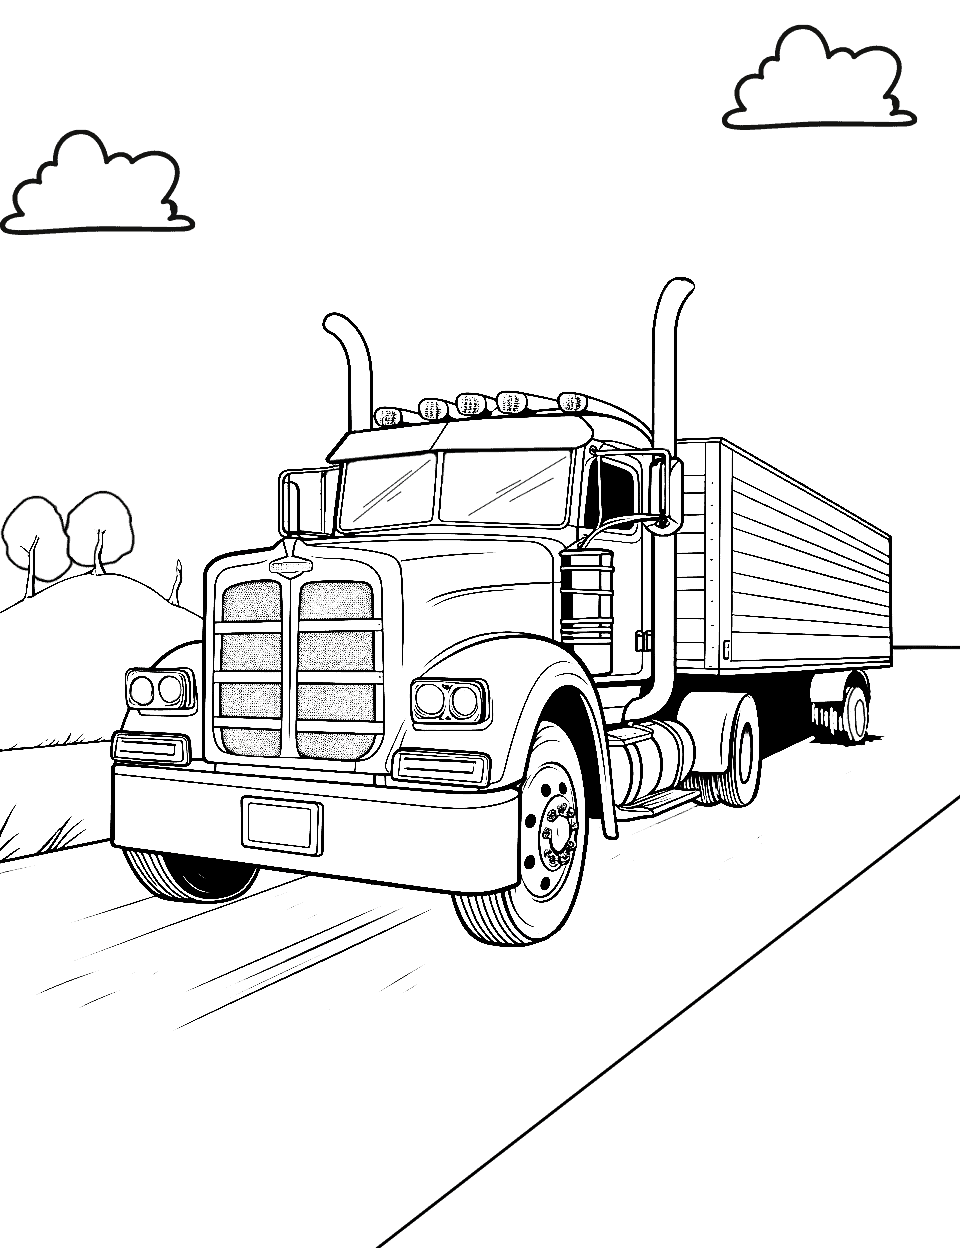 Diesel Truck on Highway Coloring Page - A powerful diesel truck hauling a trailer on an open highway.